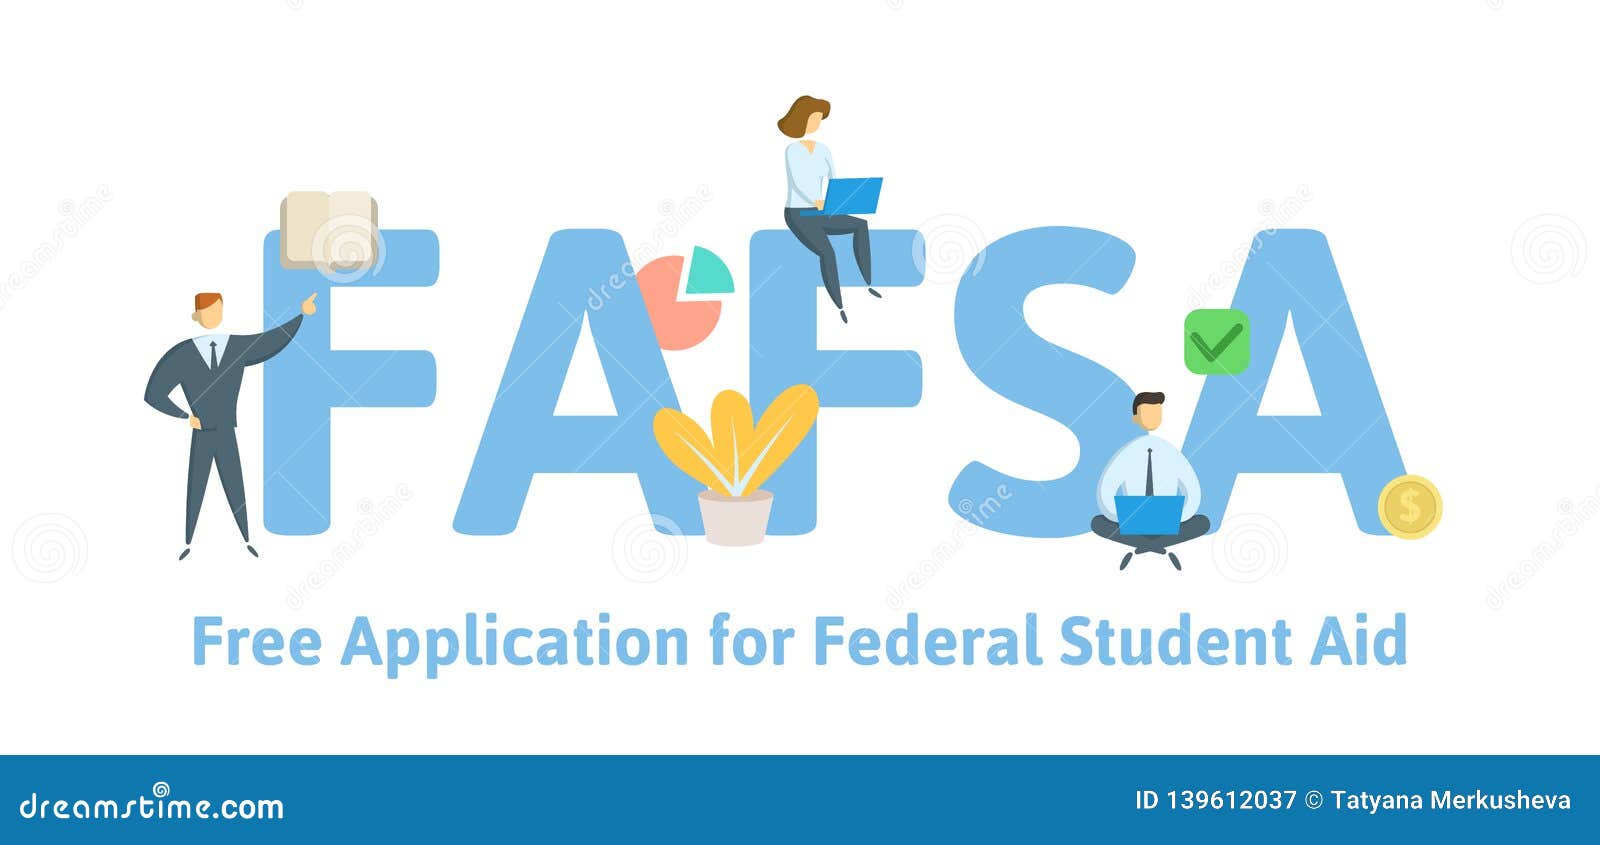 FAFSA, Free Application for Federal Student Aid. Concept with Keywords